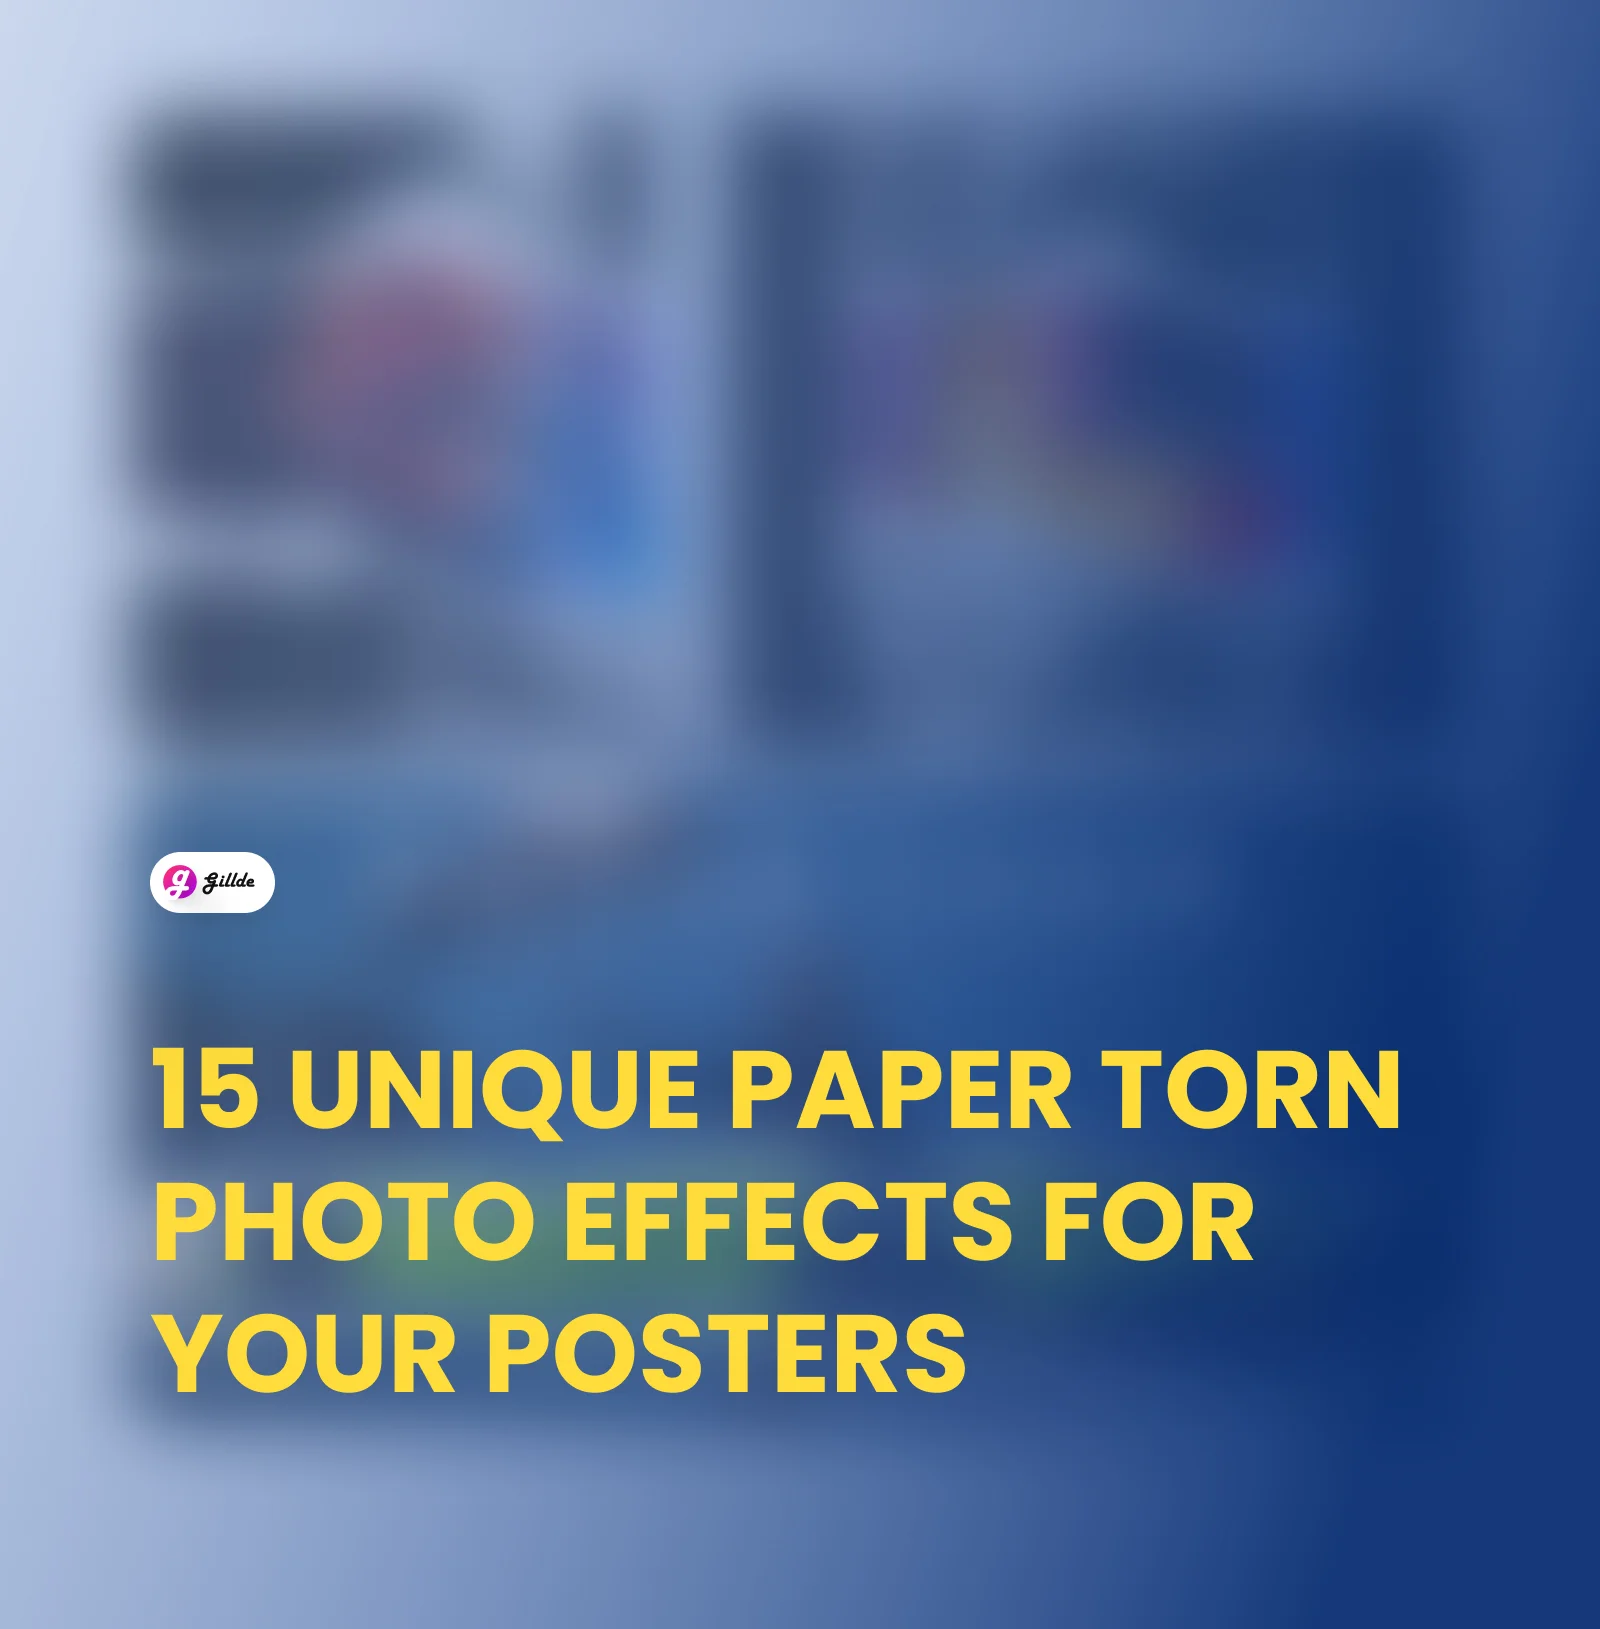 Paper Torn Photo Effects